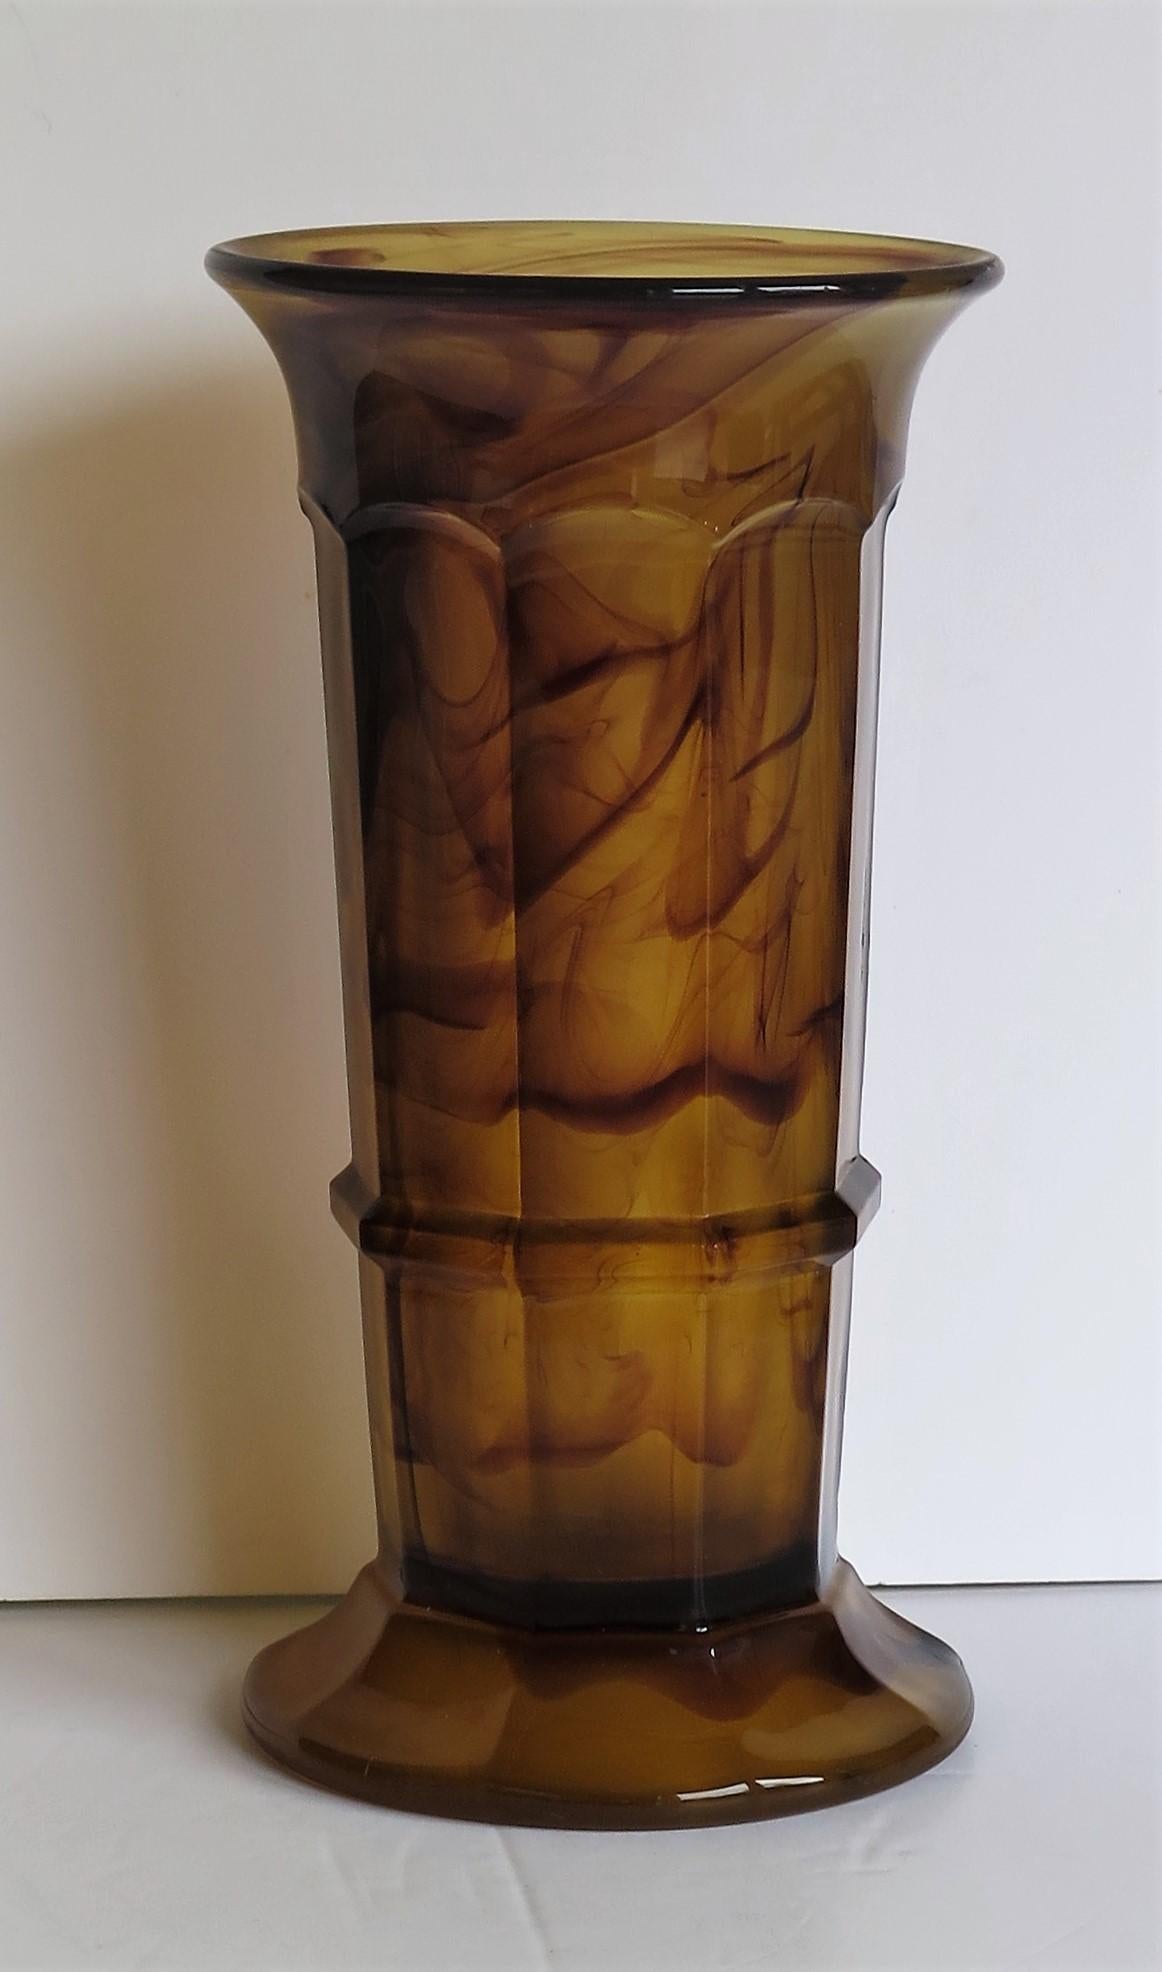 Pressed Art Deco Large Vase Cloud Glass by George Davidson, English Ca 1930s